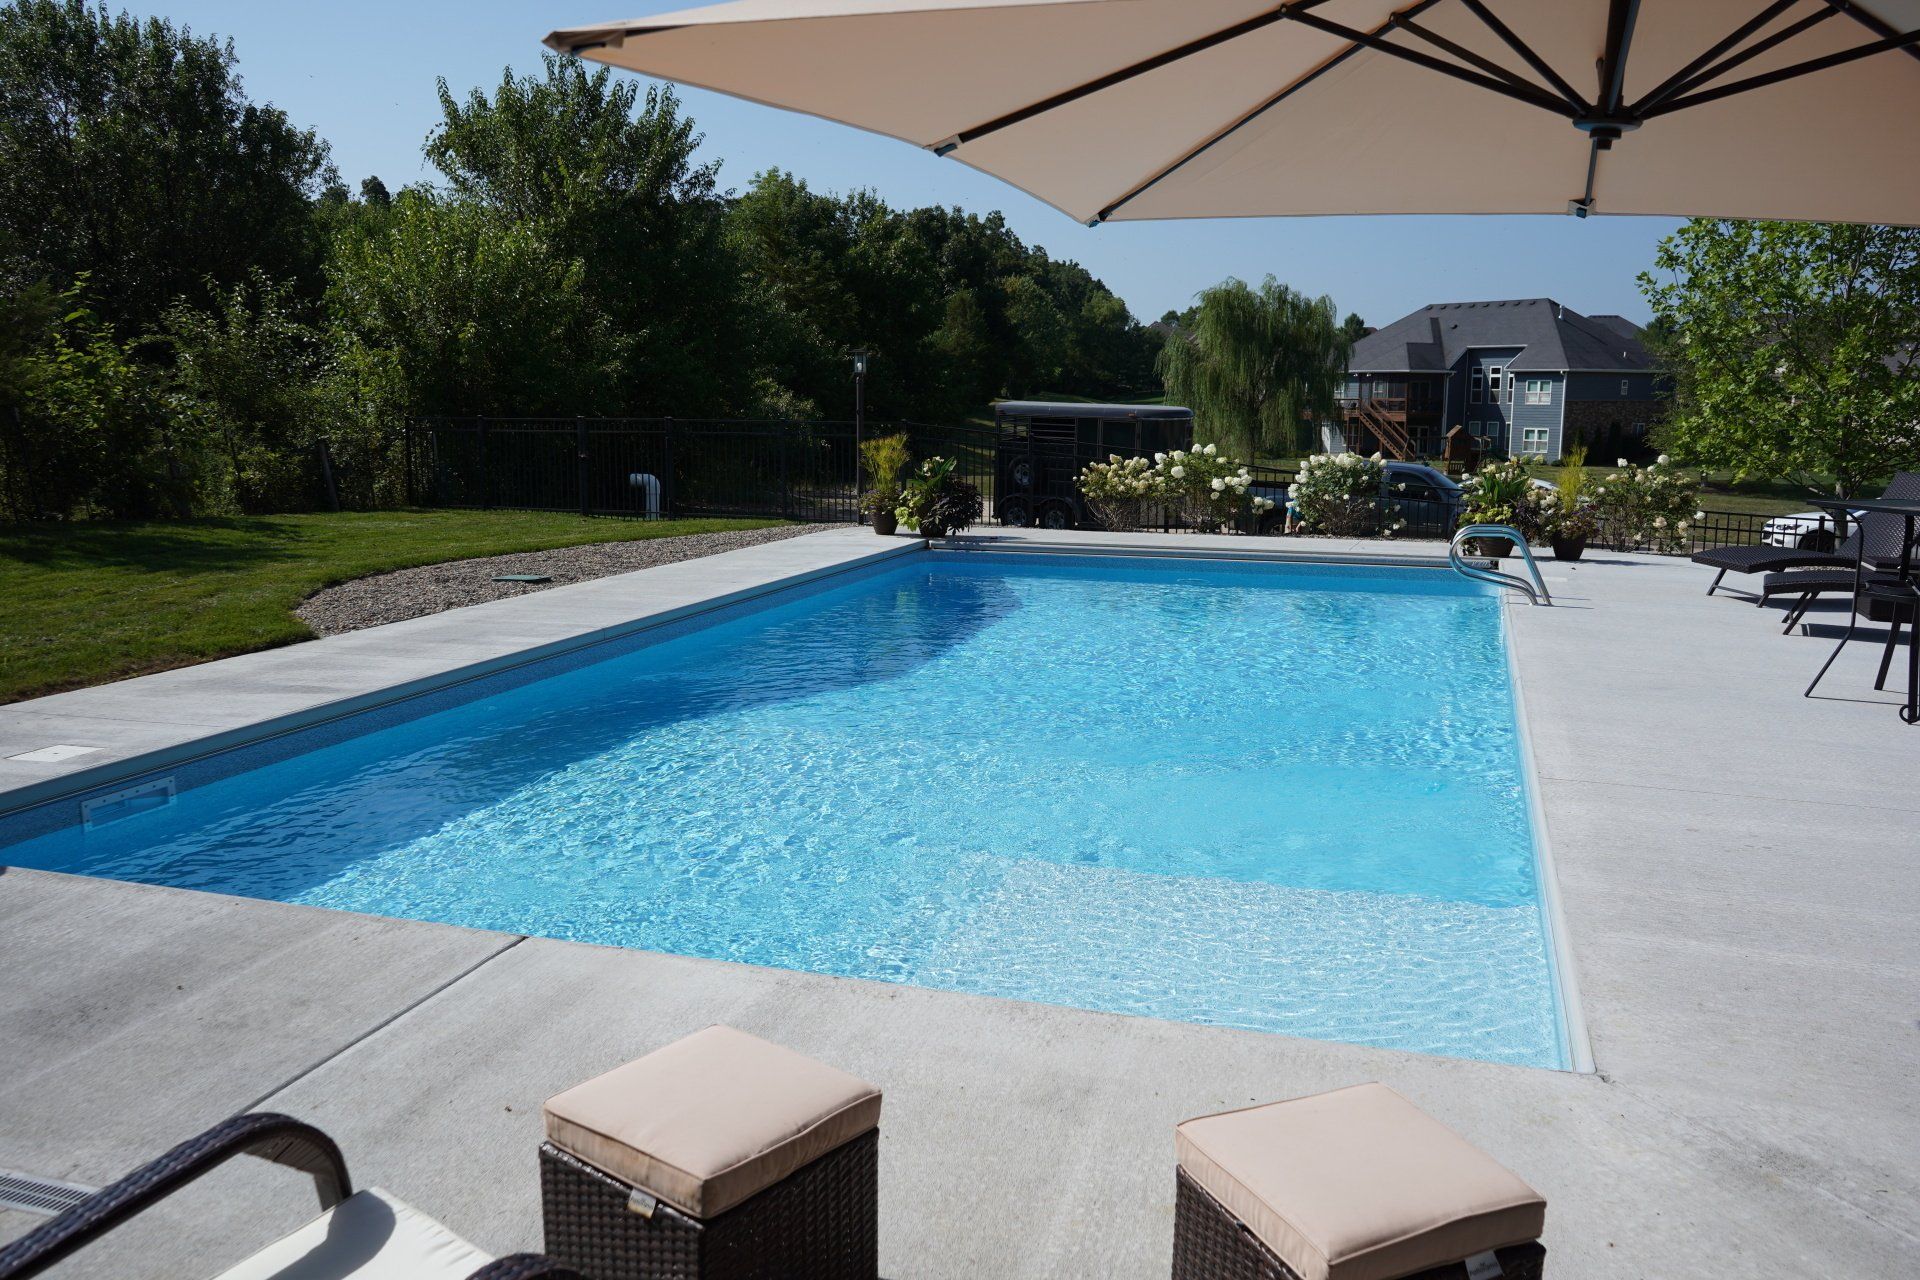 Install an Automatic Pool Cover in Columbia, MO for Easy Cleaning & Safety with Peavler Construction